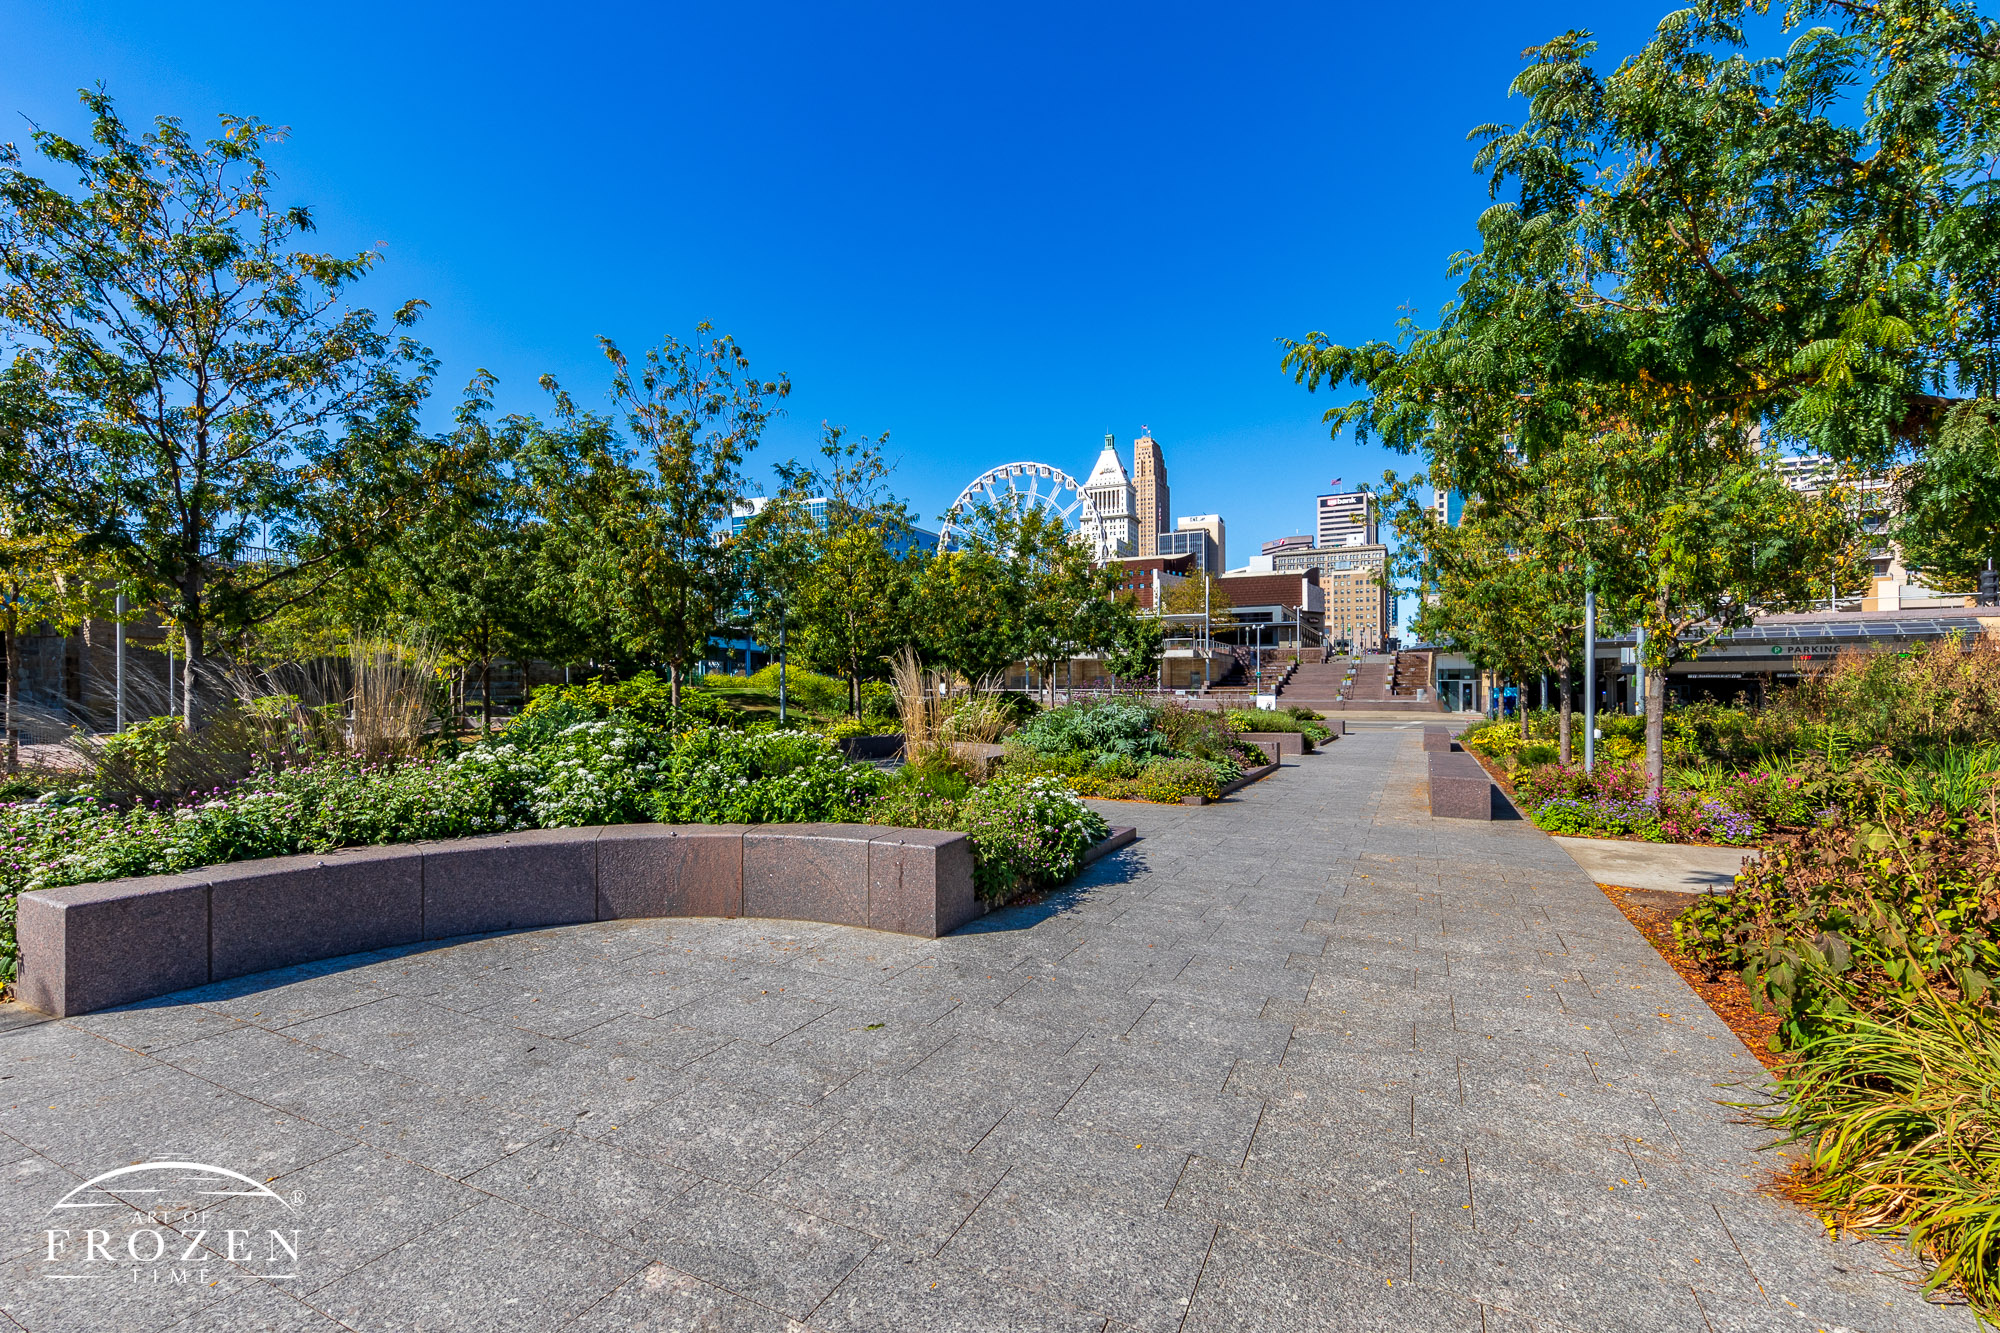 The Smale Riverfront Gardens which entails a garden filled plaza between the Cincy skyline and the Ohio River